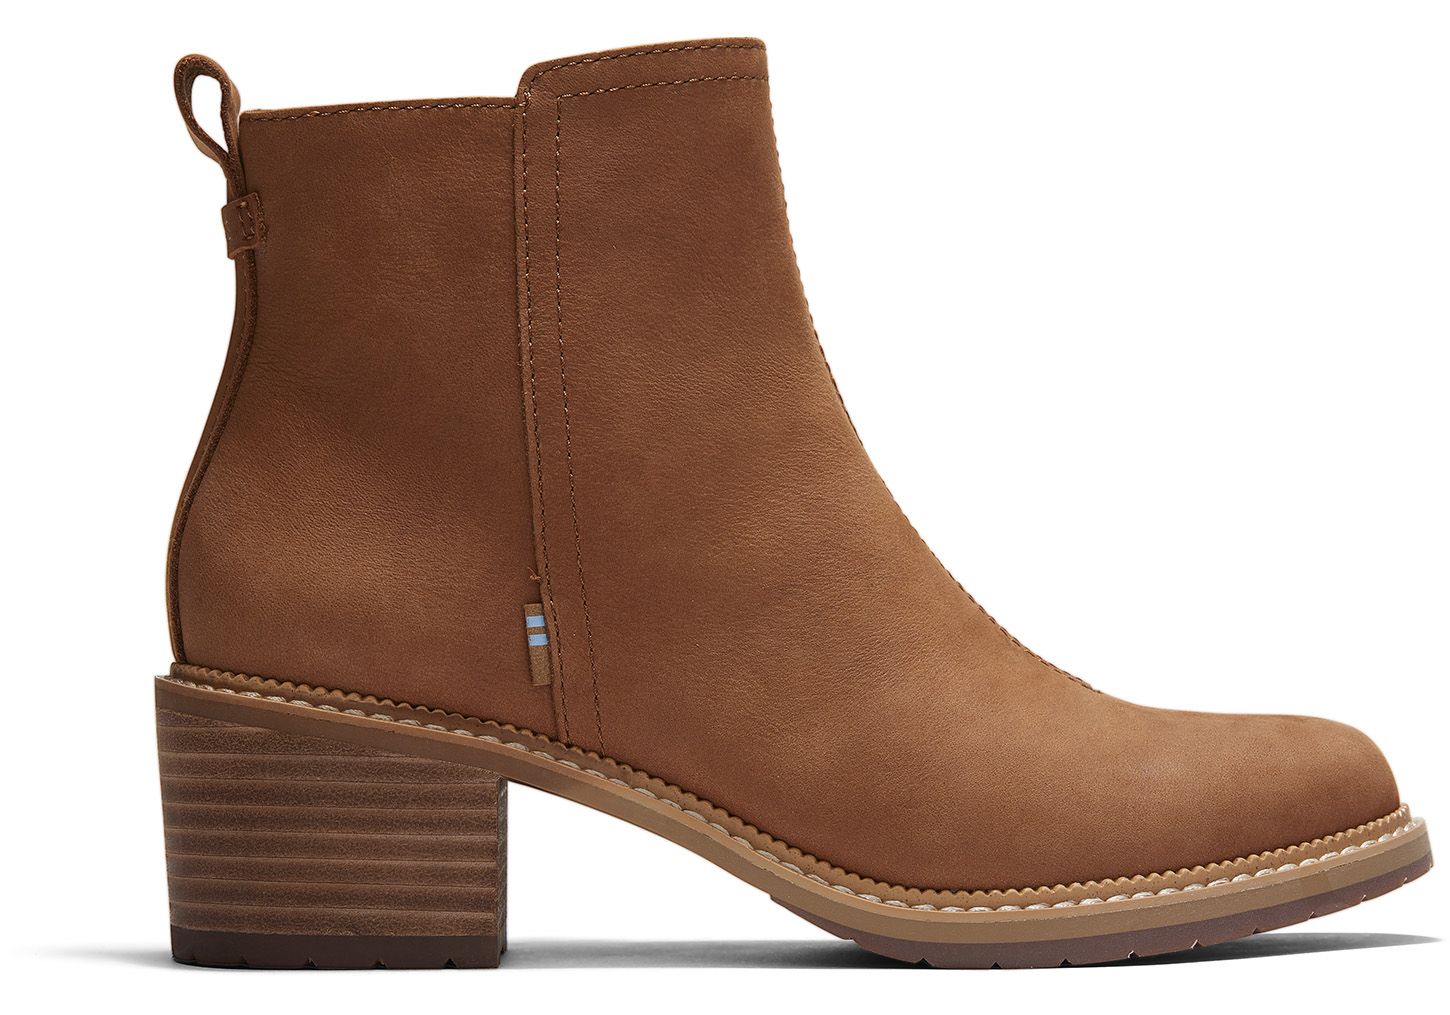 TOMS Brown Tan Smooth Waxy Leather Women's Marina Booties | TOMS (US)